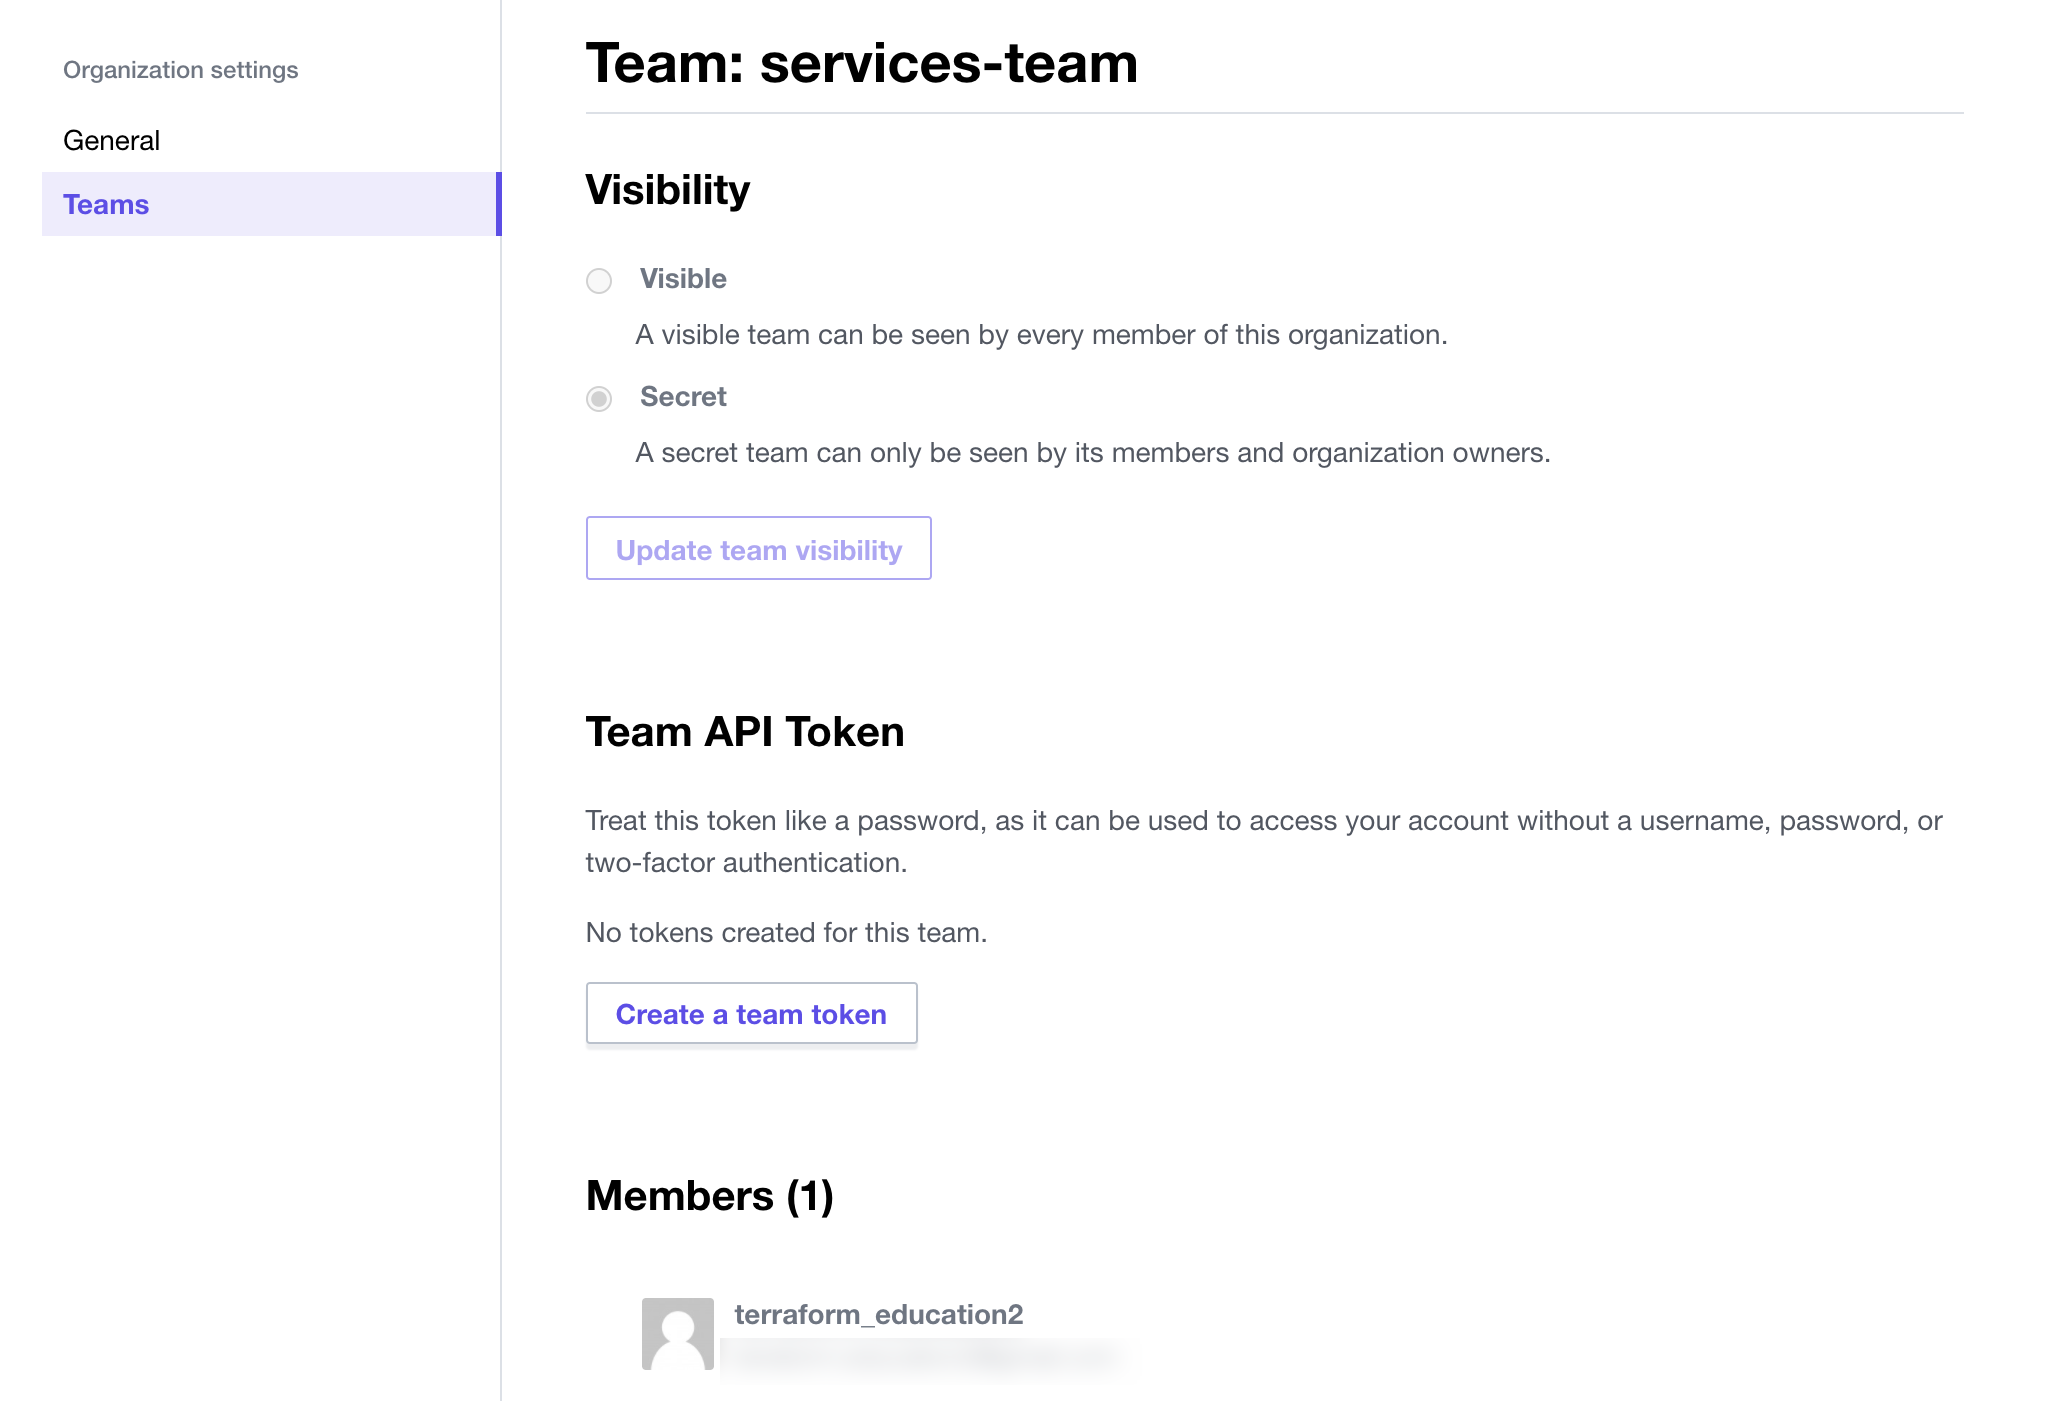 View services-team settings and members